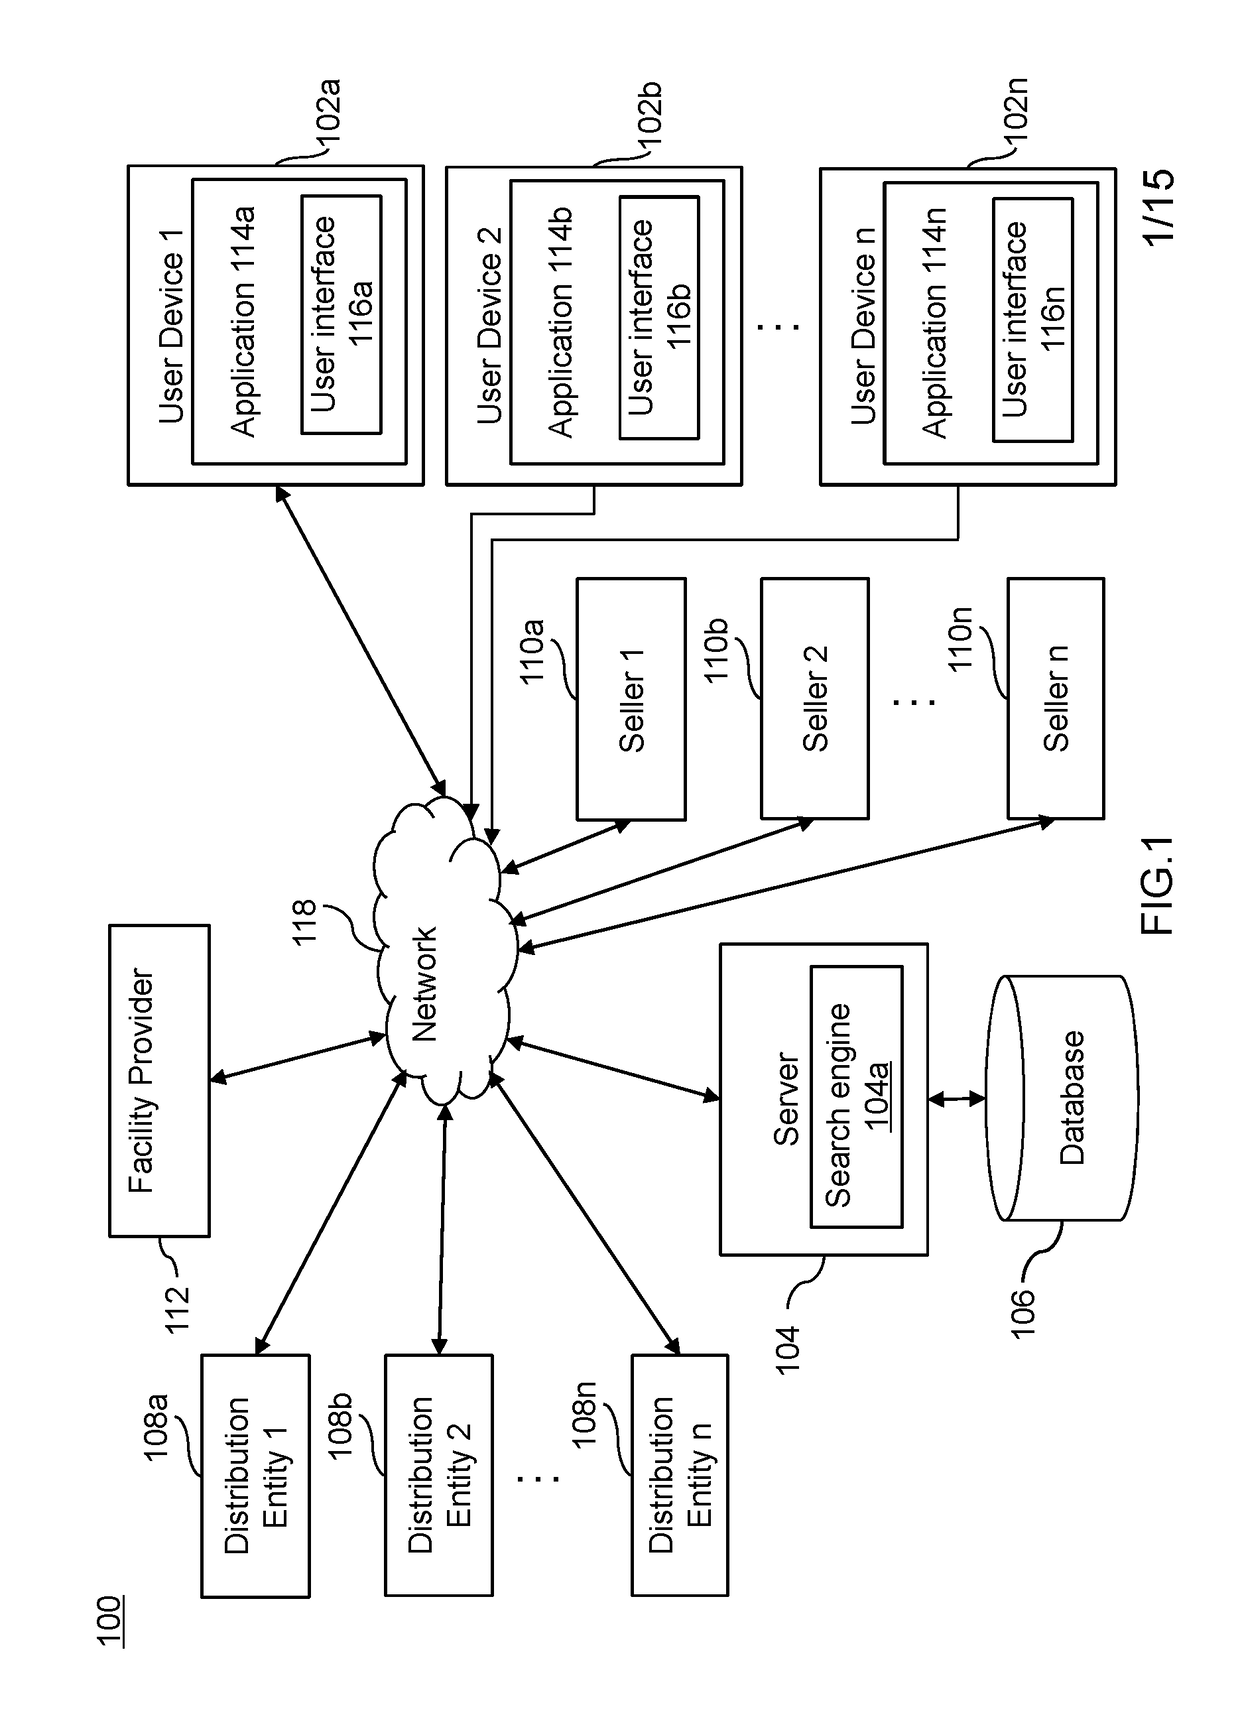 System and methods for facilitating a purchase